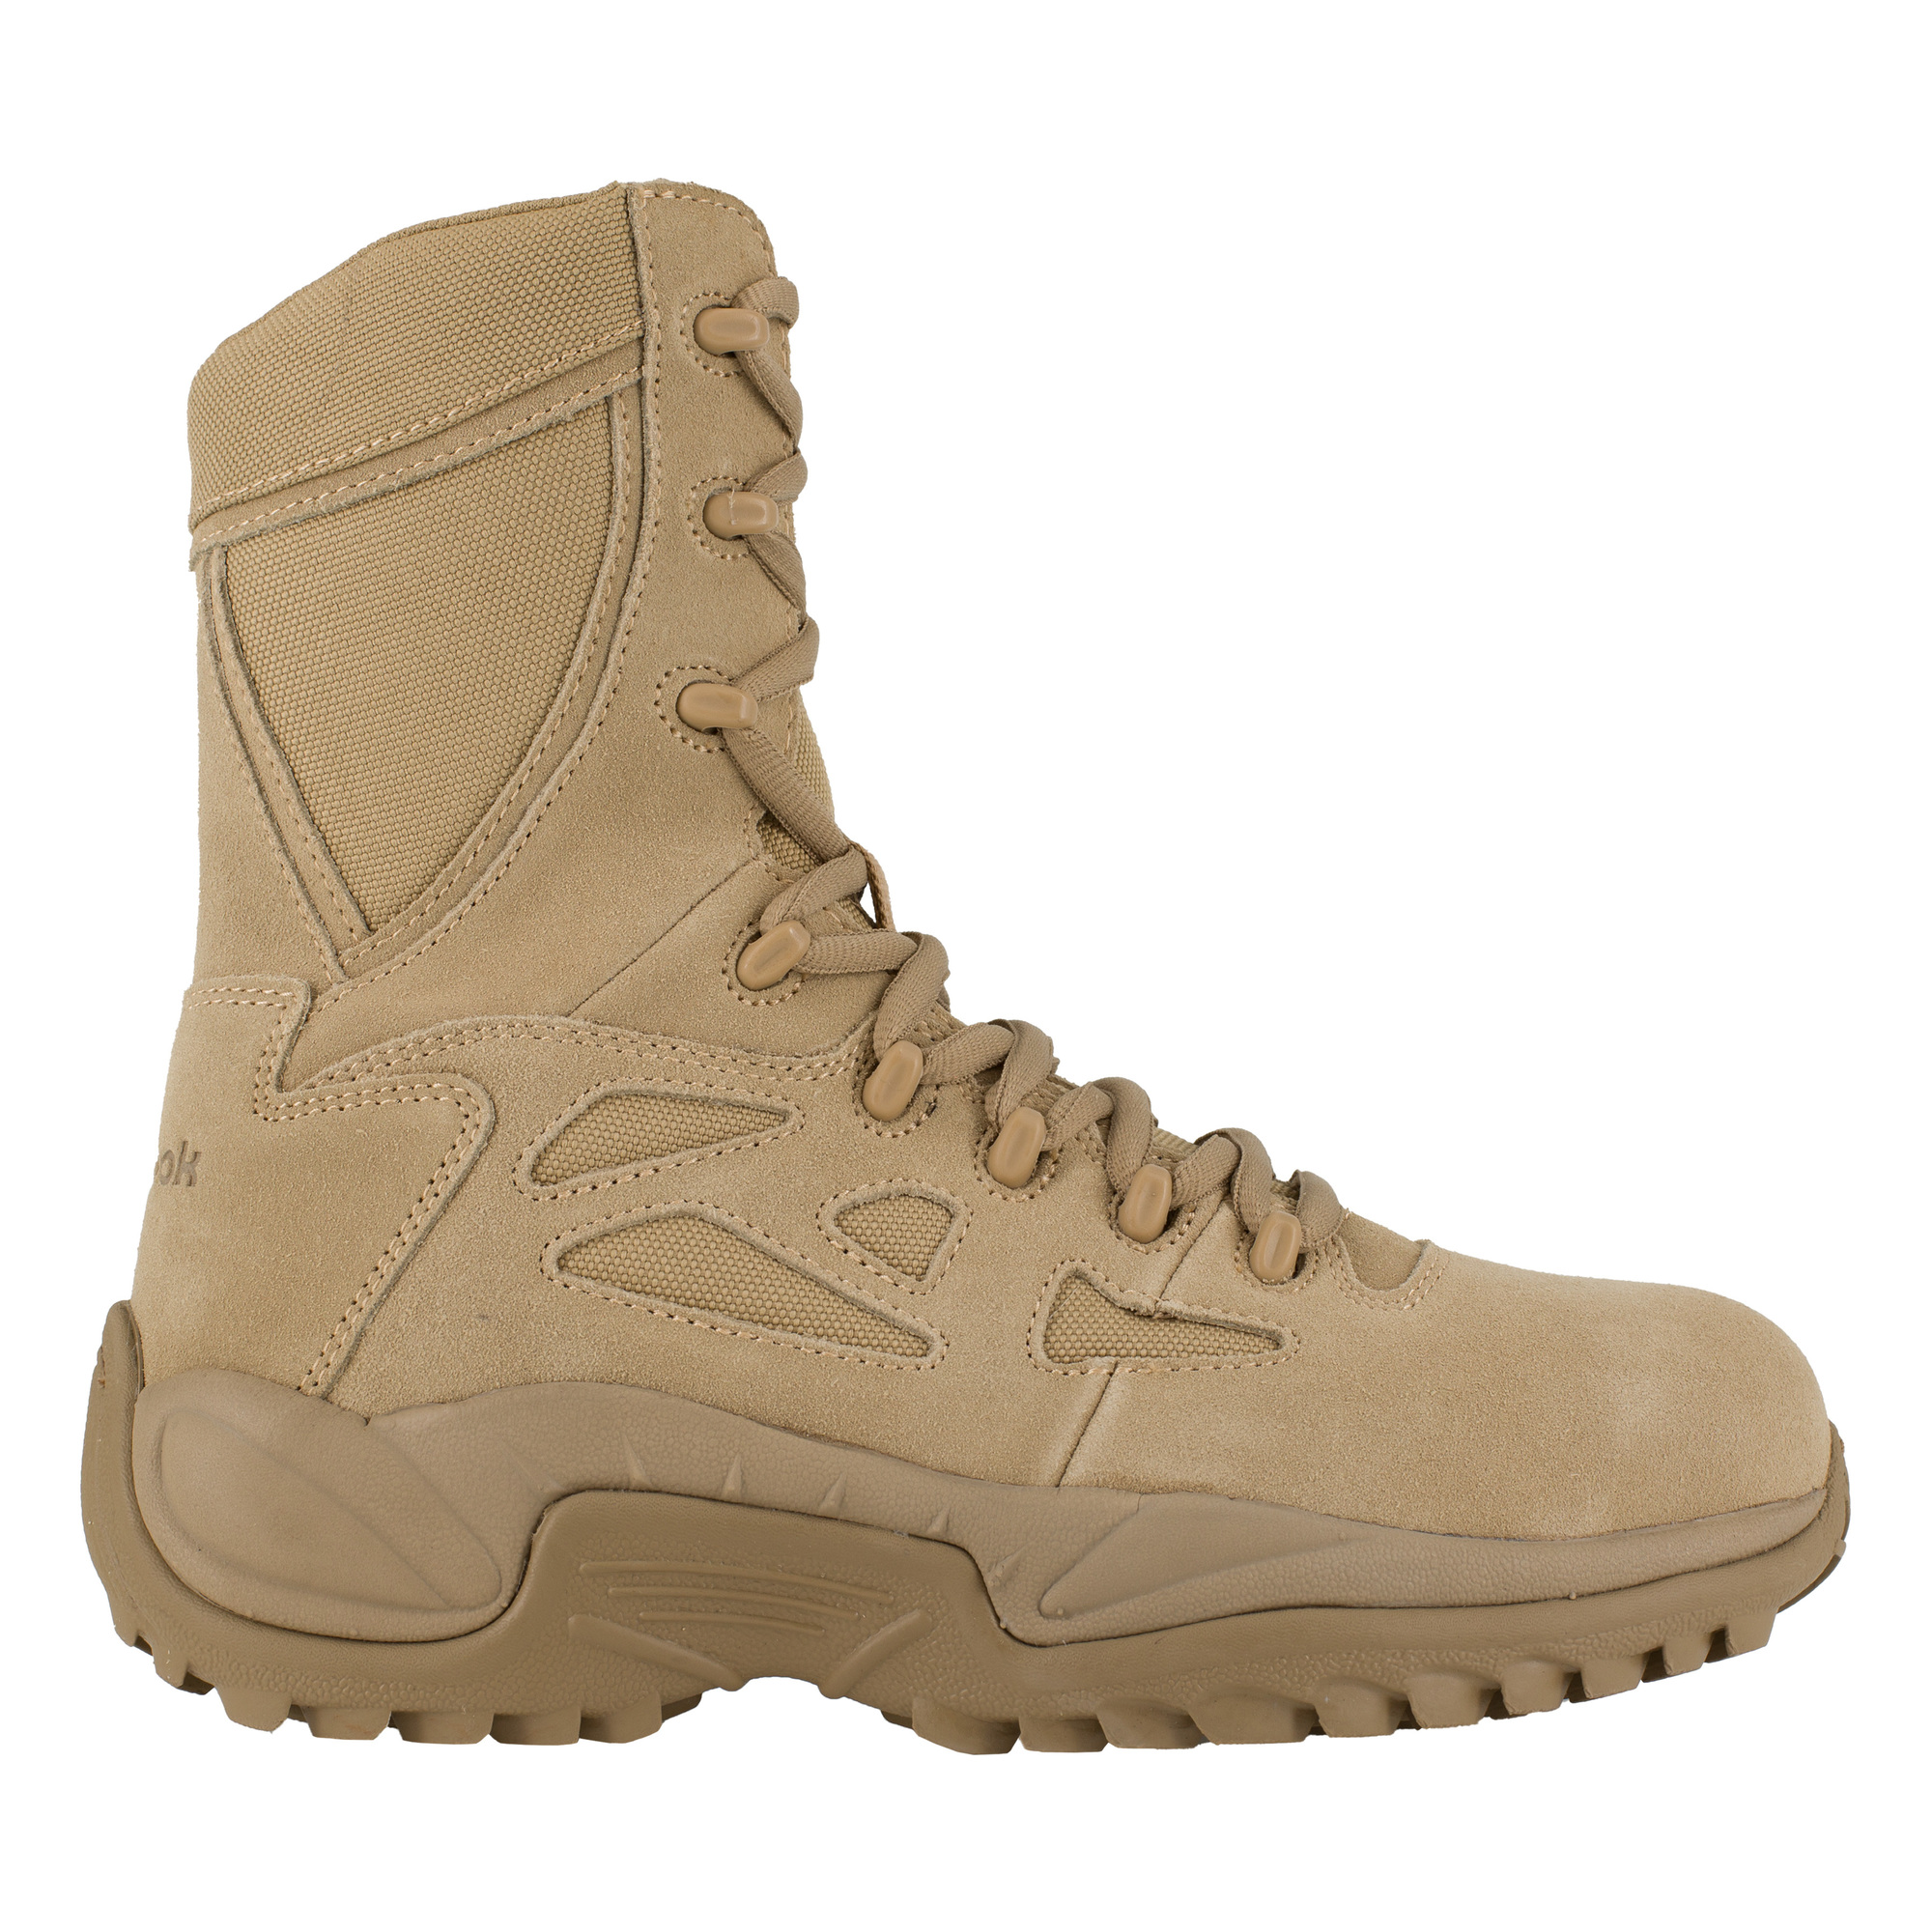 Reebok, 8Inch Stealth Tactical Boot with Side Zipper, Size 7 1/2, Width Medium, Color Desert Tan, Model RB894